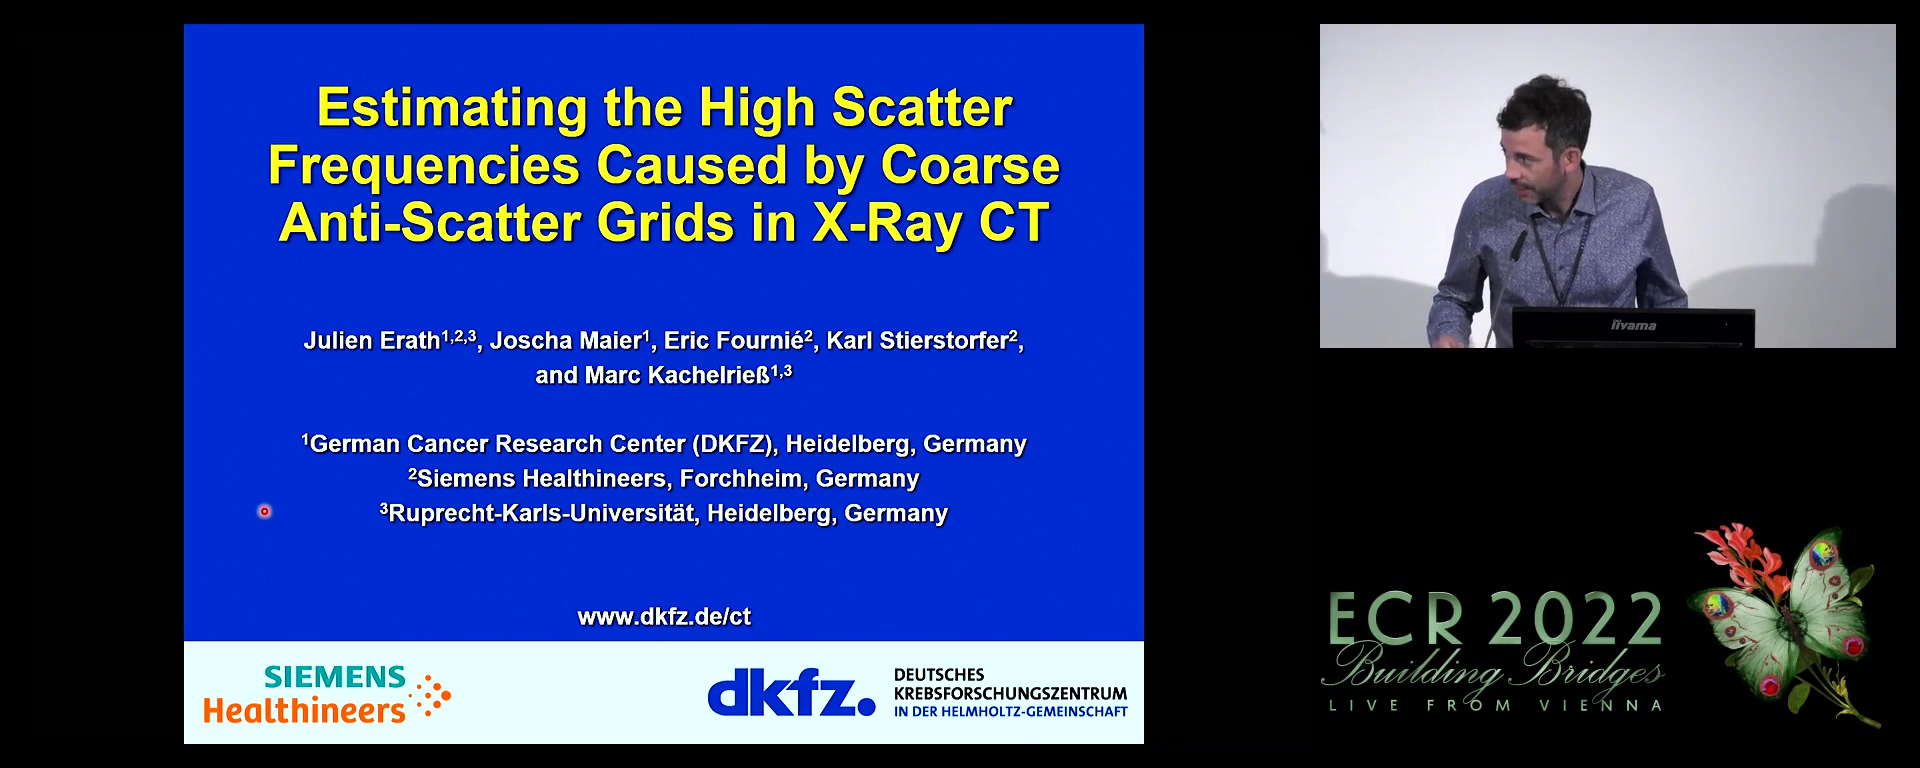 Estimating the high scatter frequencies caused by coarse anti-scatter grids in x-Ray CT - Julien Erath, Heidelberg / DE